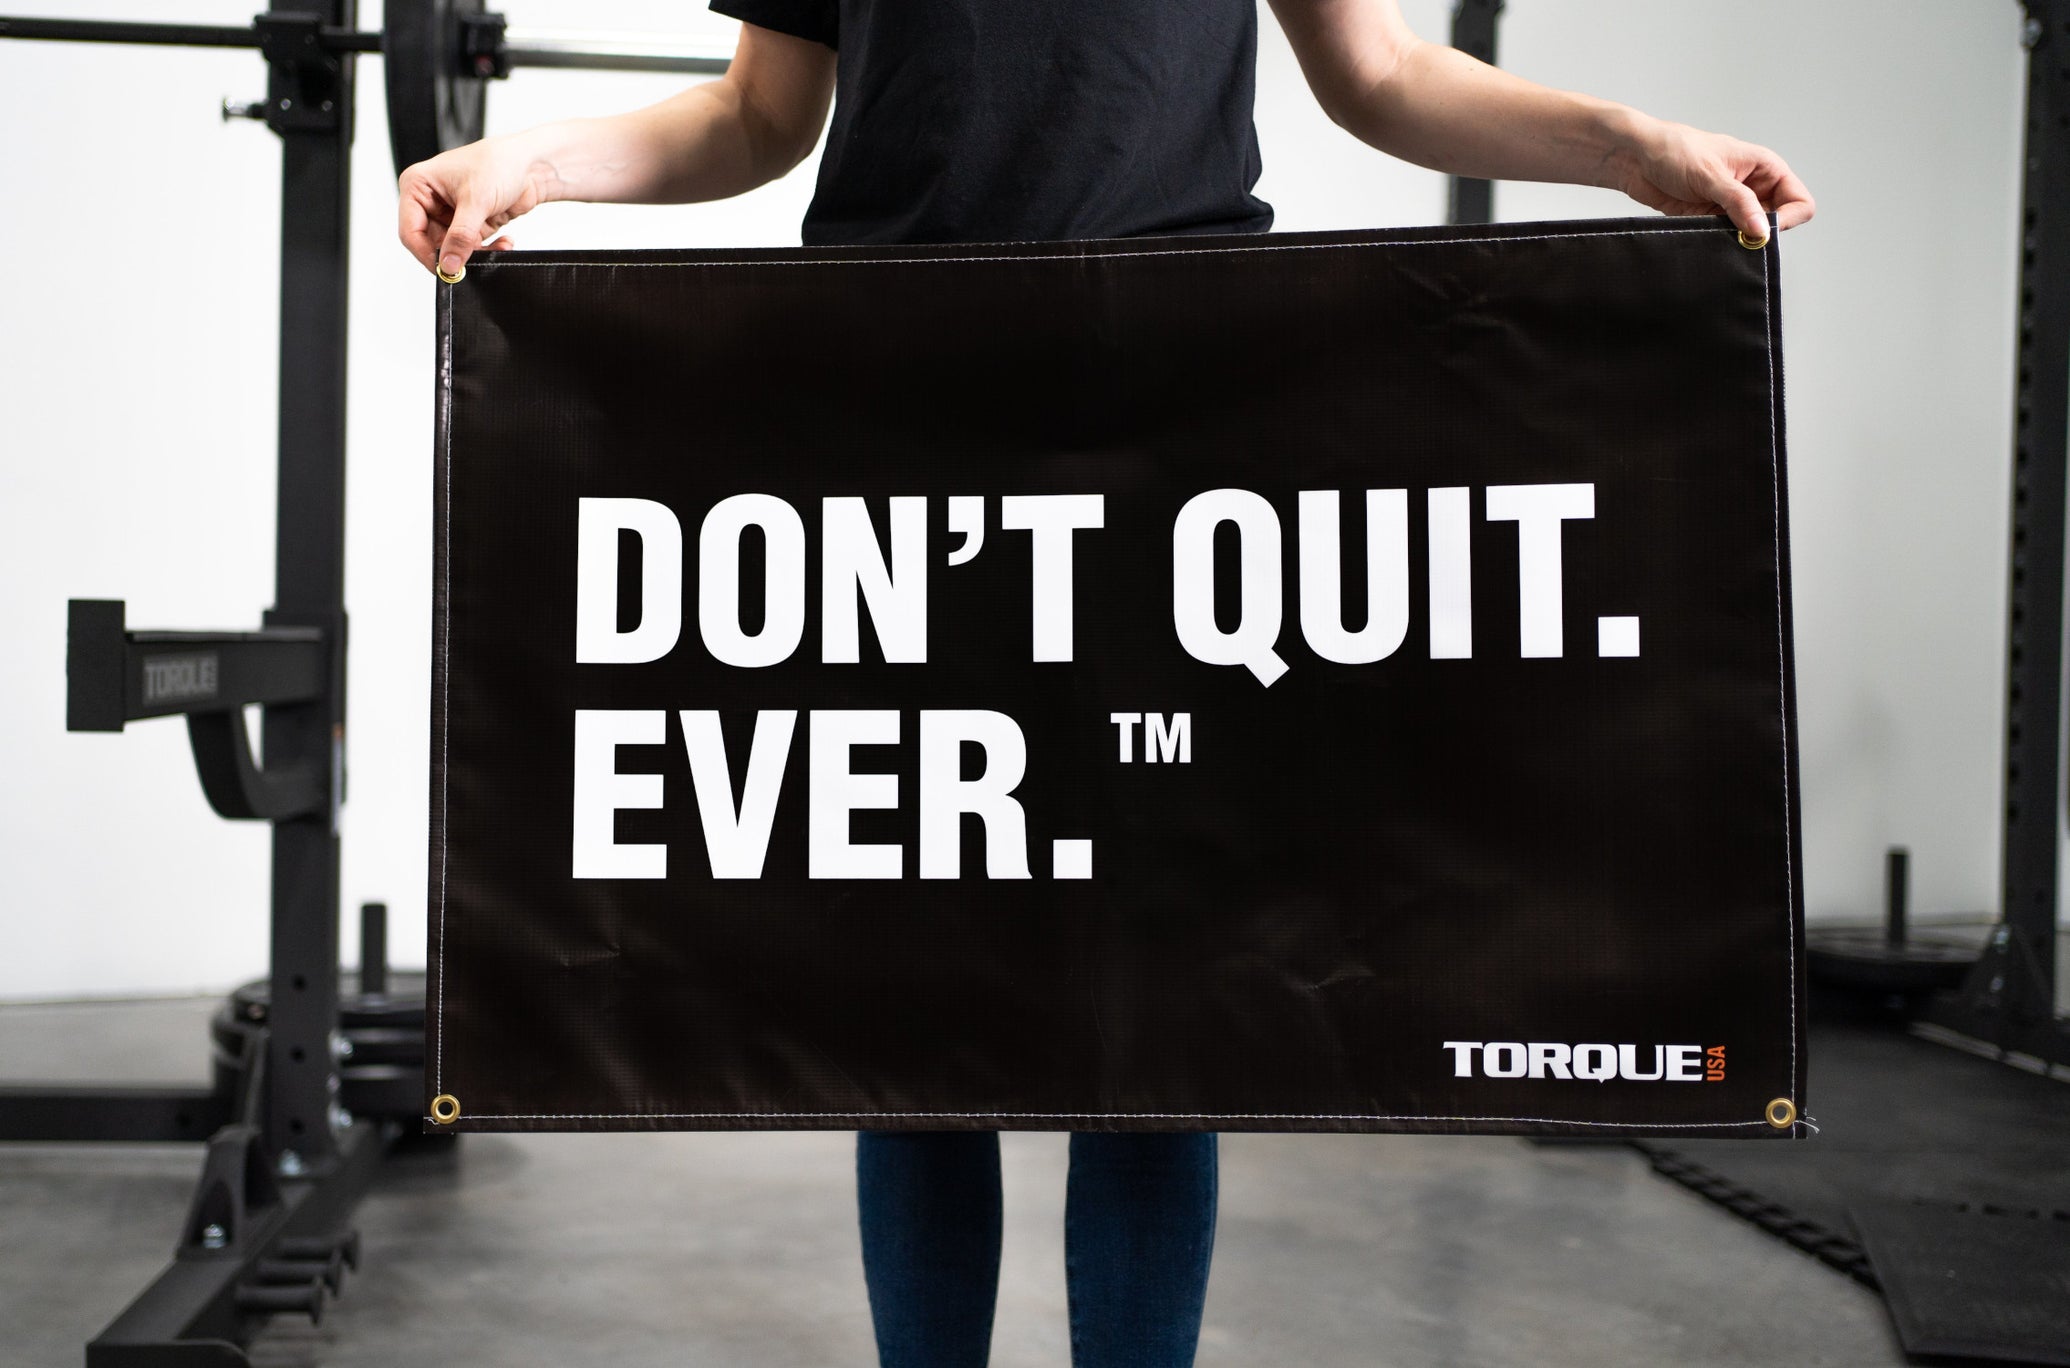 Torque Inspirational "Don't Quit. Ever." Gym Banner